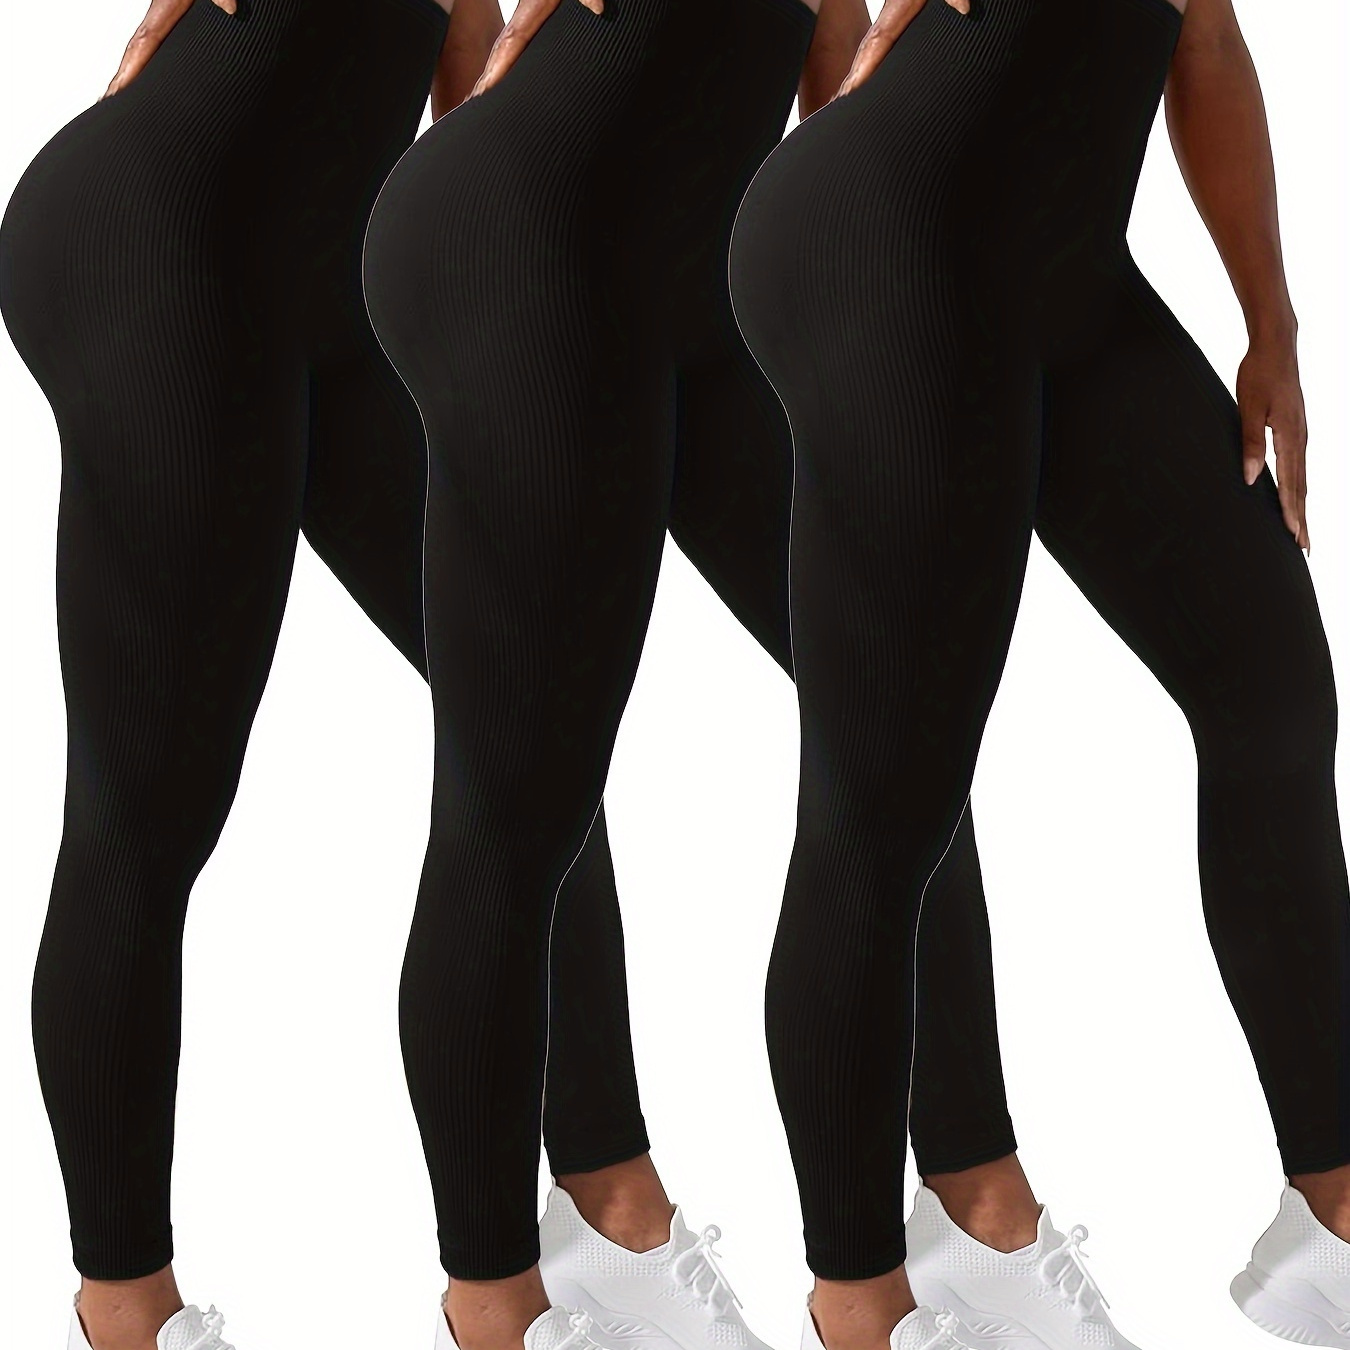 

3-pack High-waisted Women's Leggings, Yoga Pants, Soft Tummy Control Workout Leggings With Lining, Activewear For Gym & Exercise